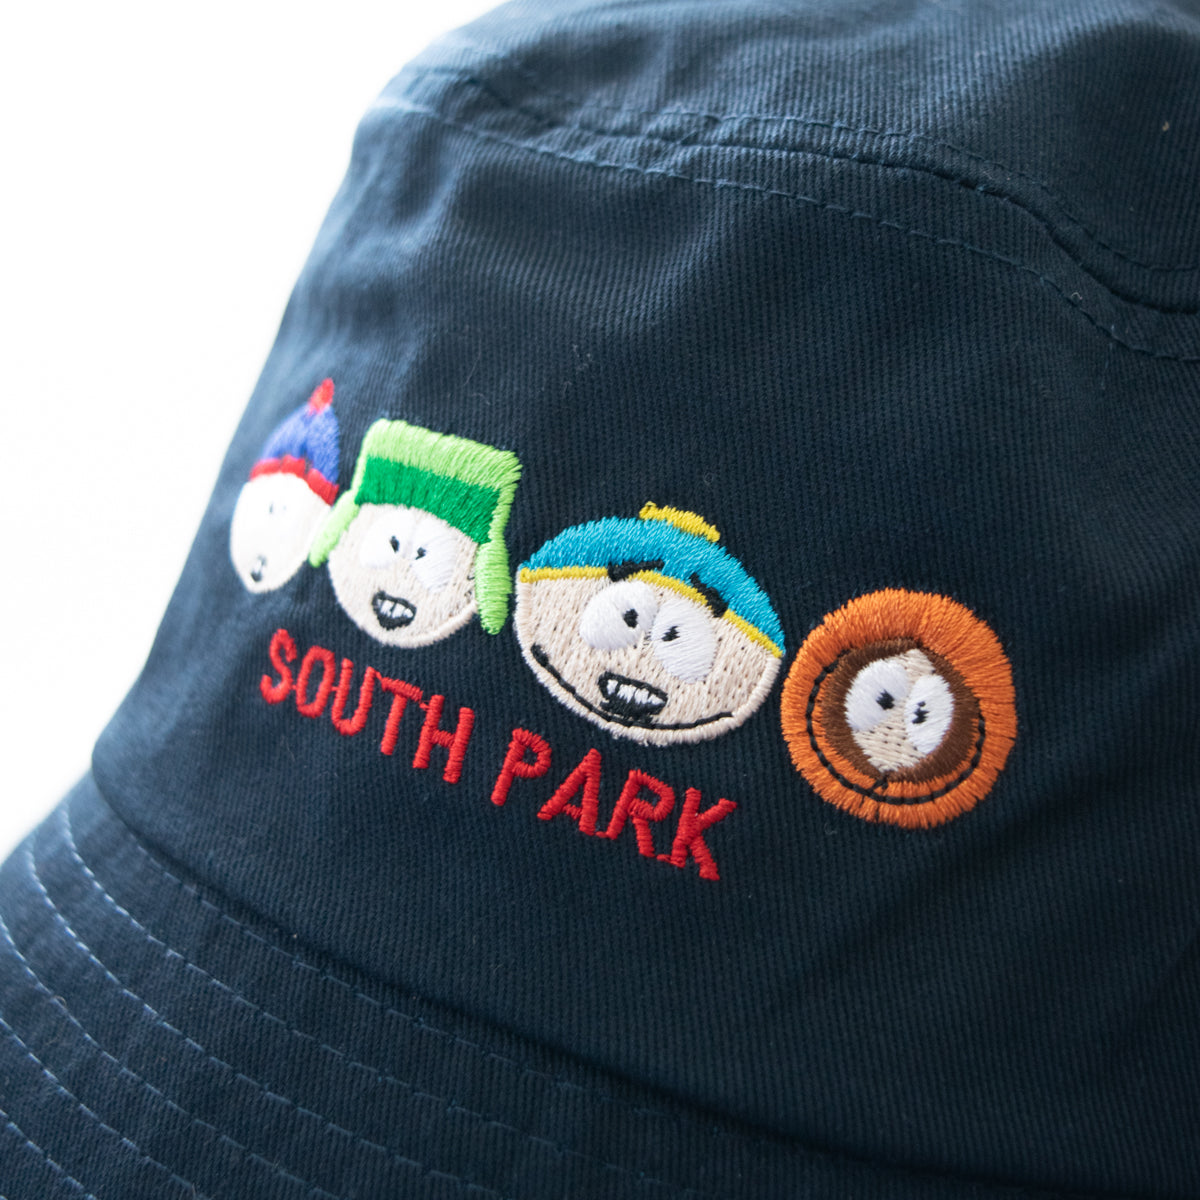 South Park embroidery bucket hat navy